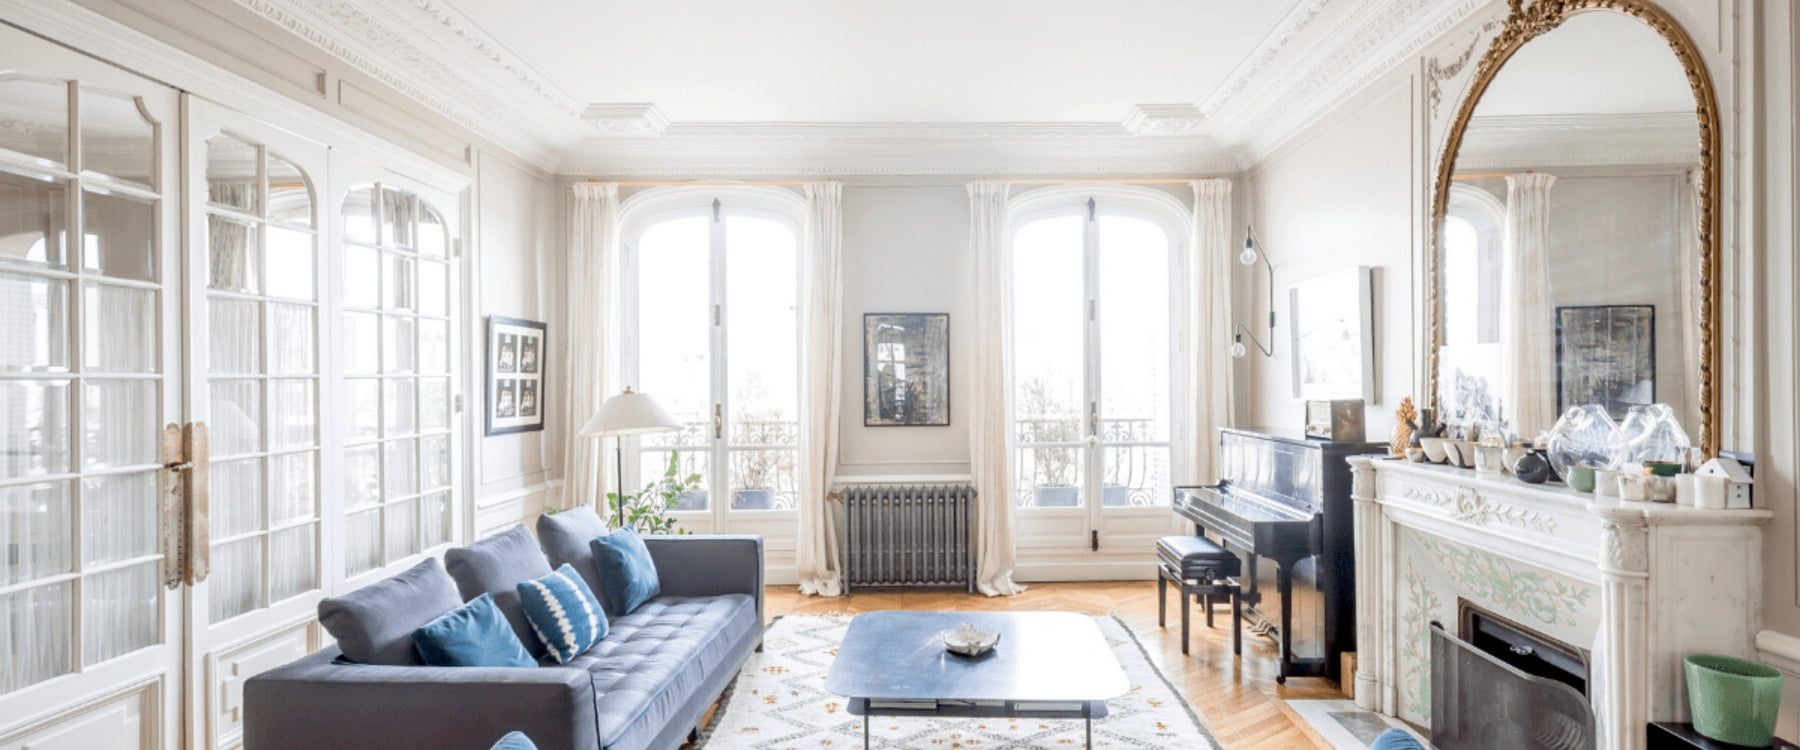 What Does Parisian Style Mean in Home Decoration?